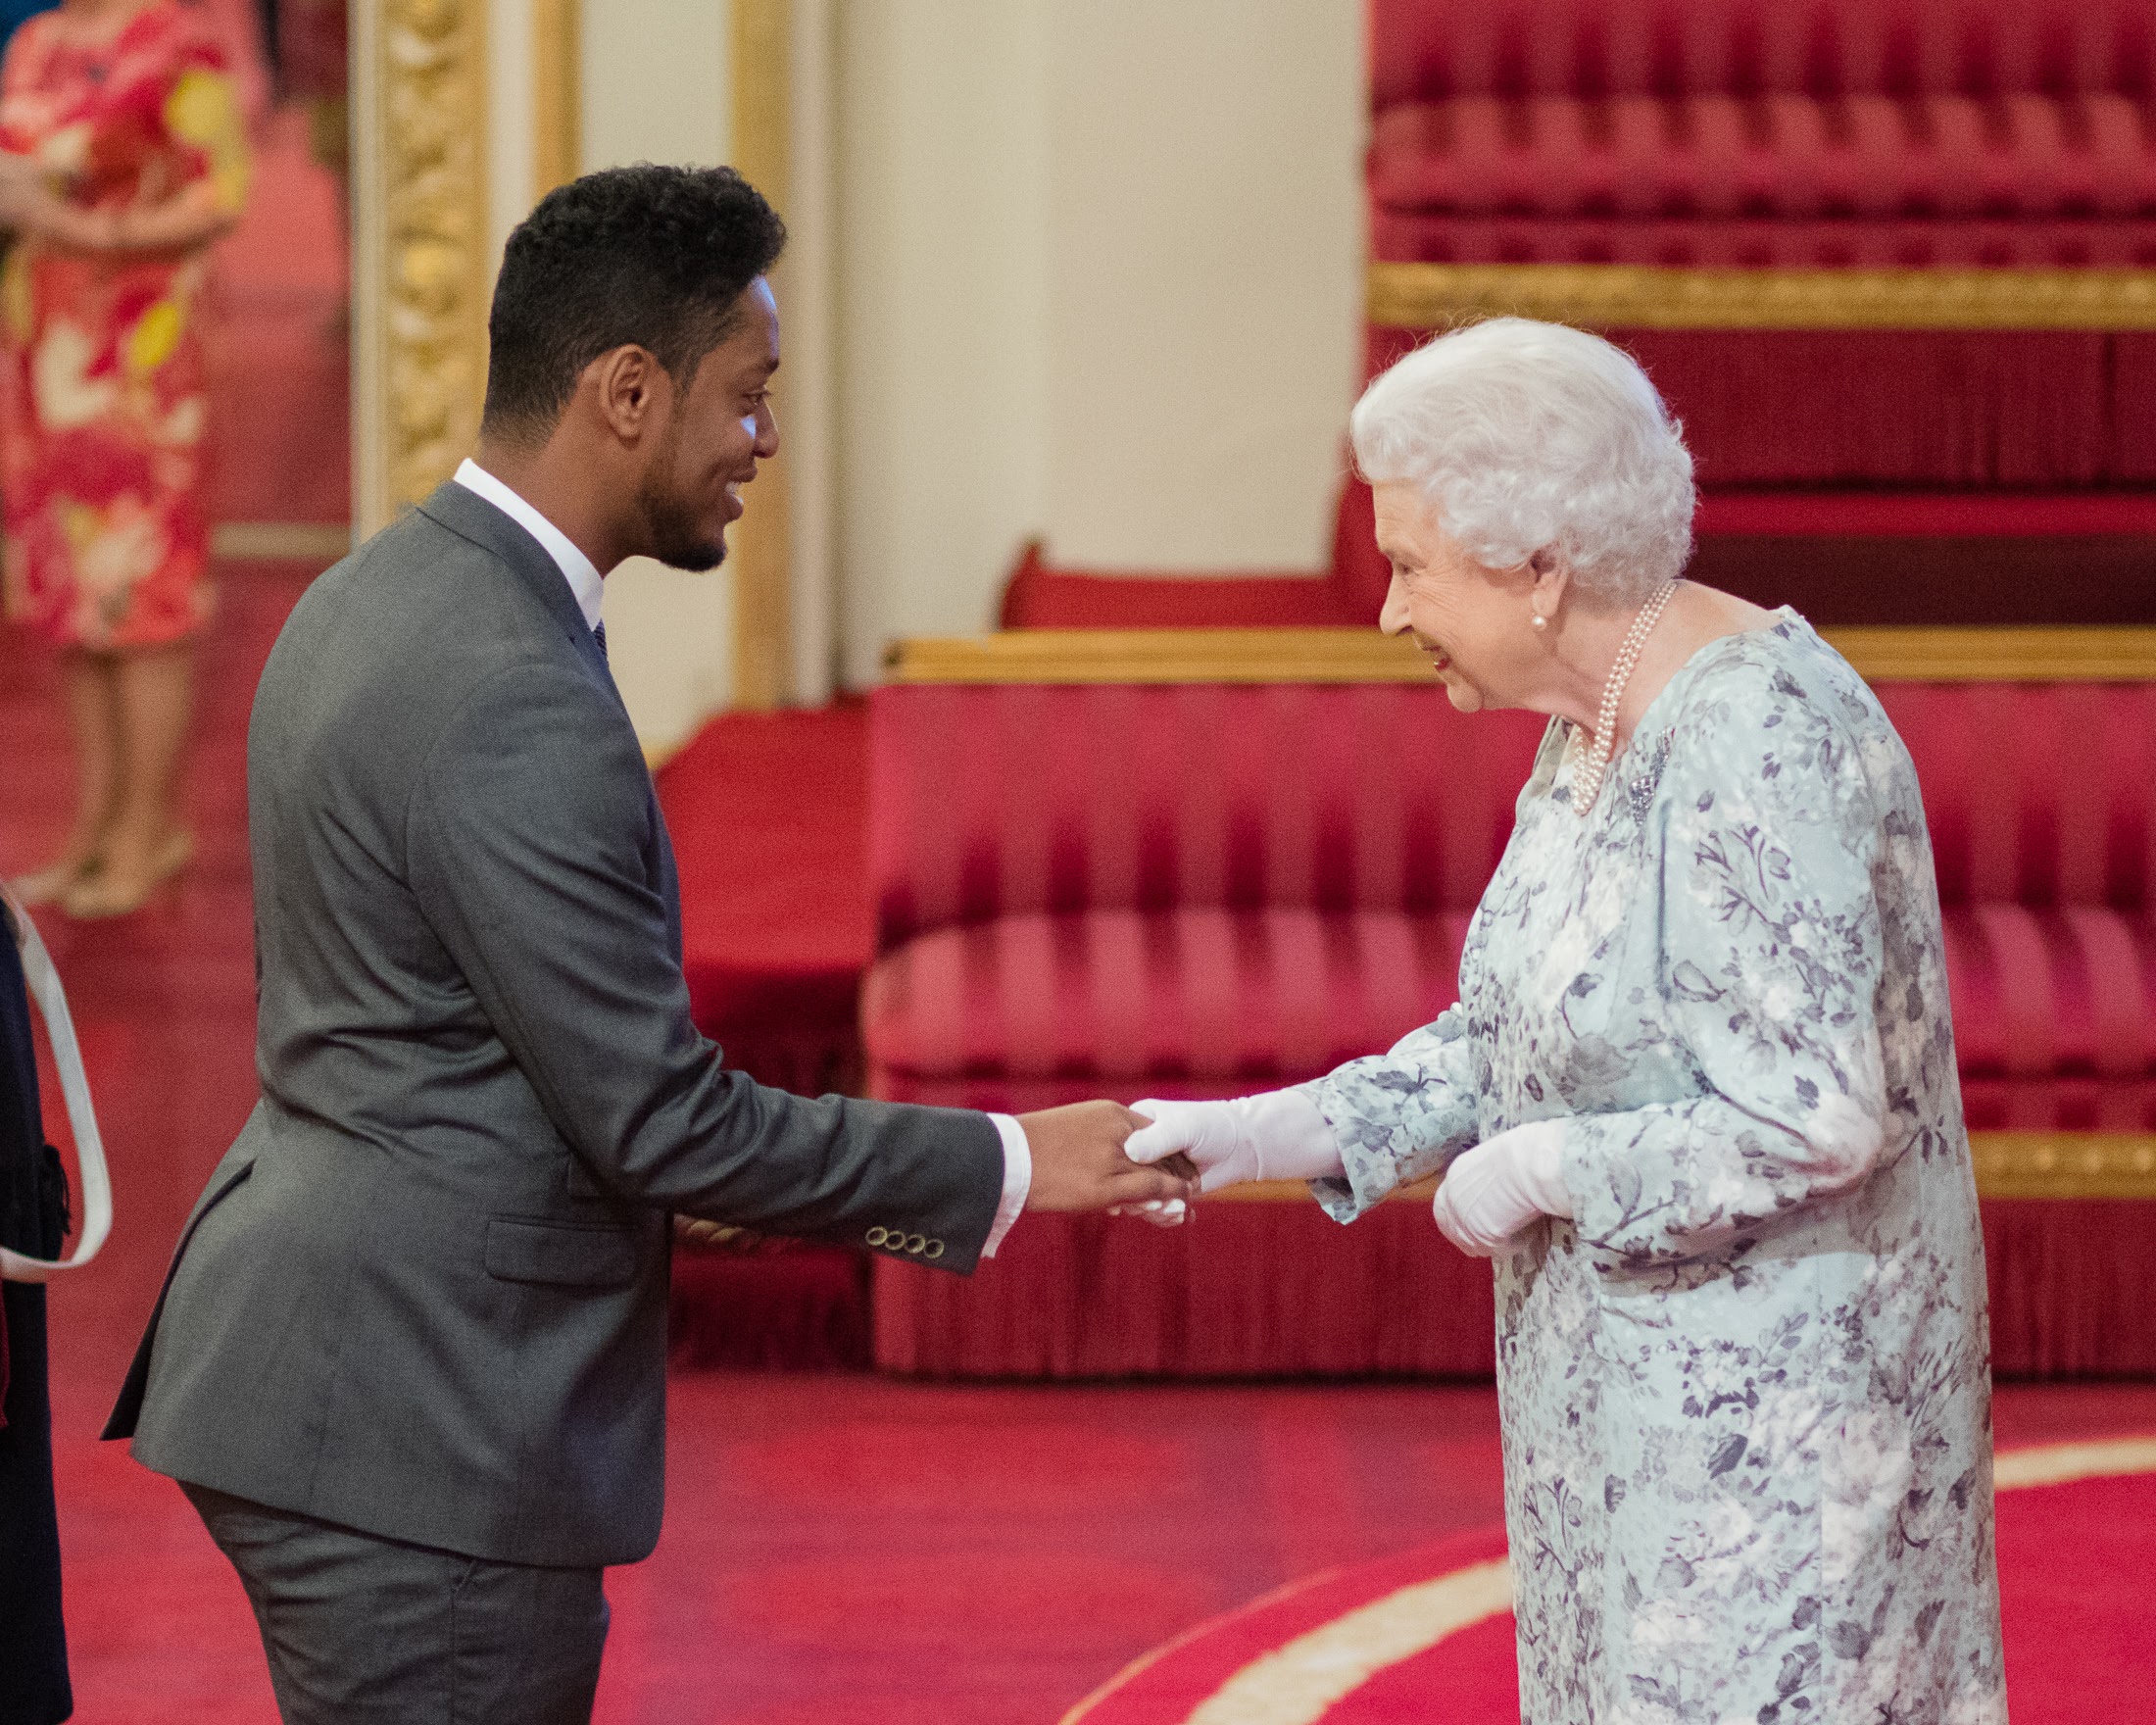 Abdullahi ALim receiving his Queen's Young Leaders Award from Her Majesty The Queen